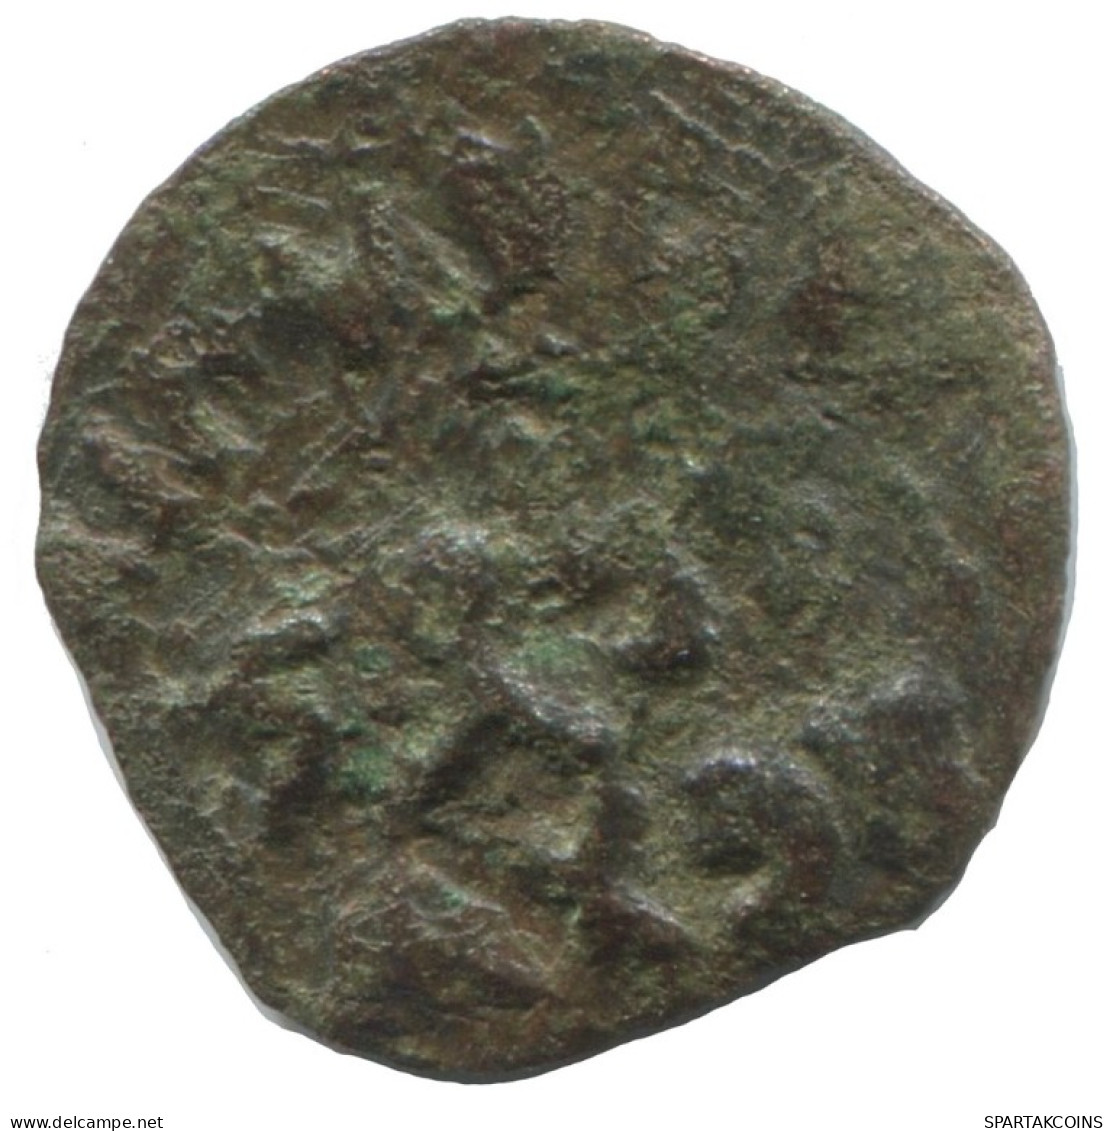 Authentic Original MEDIEVAL EUROPEAN Coin 0.6g/14mm #AC200.8.E.A - Other - Europe